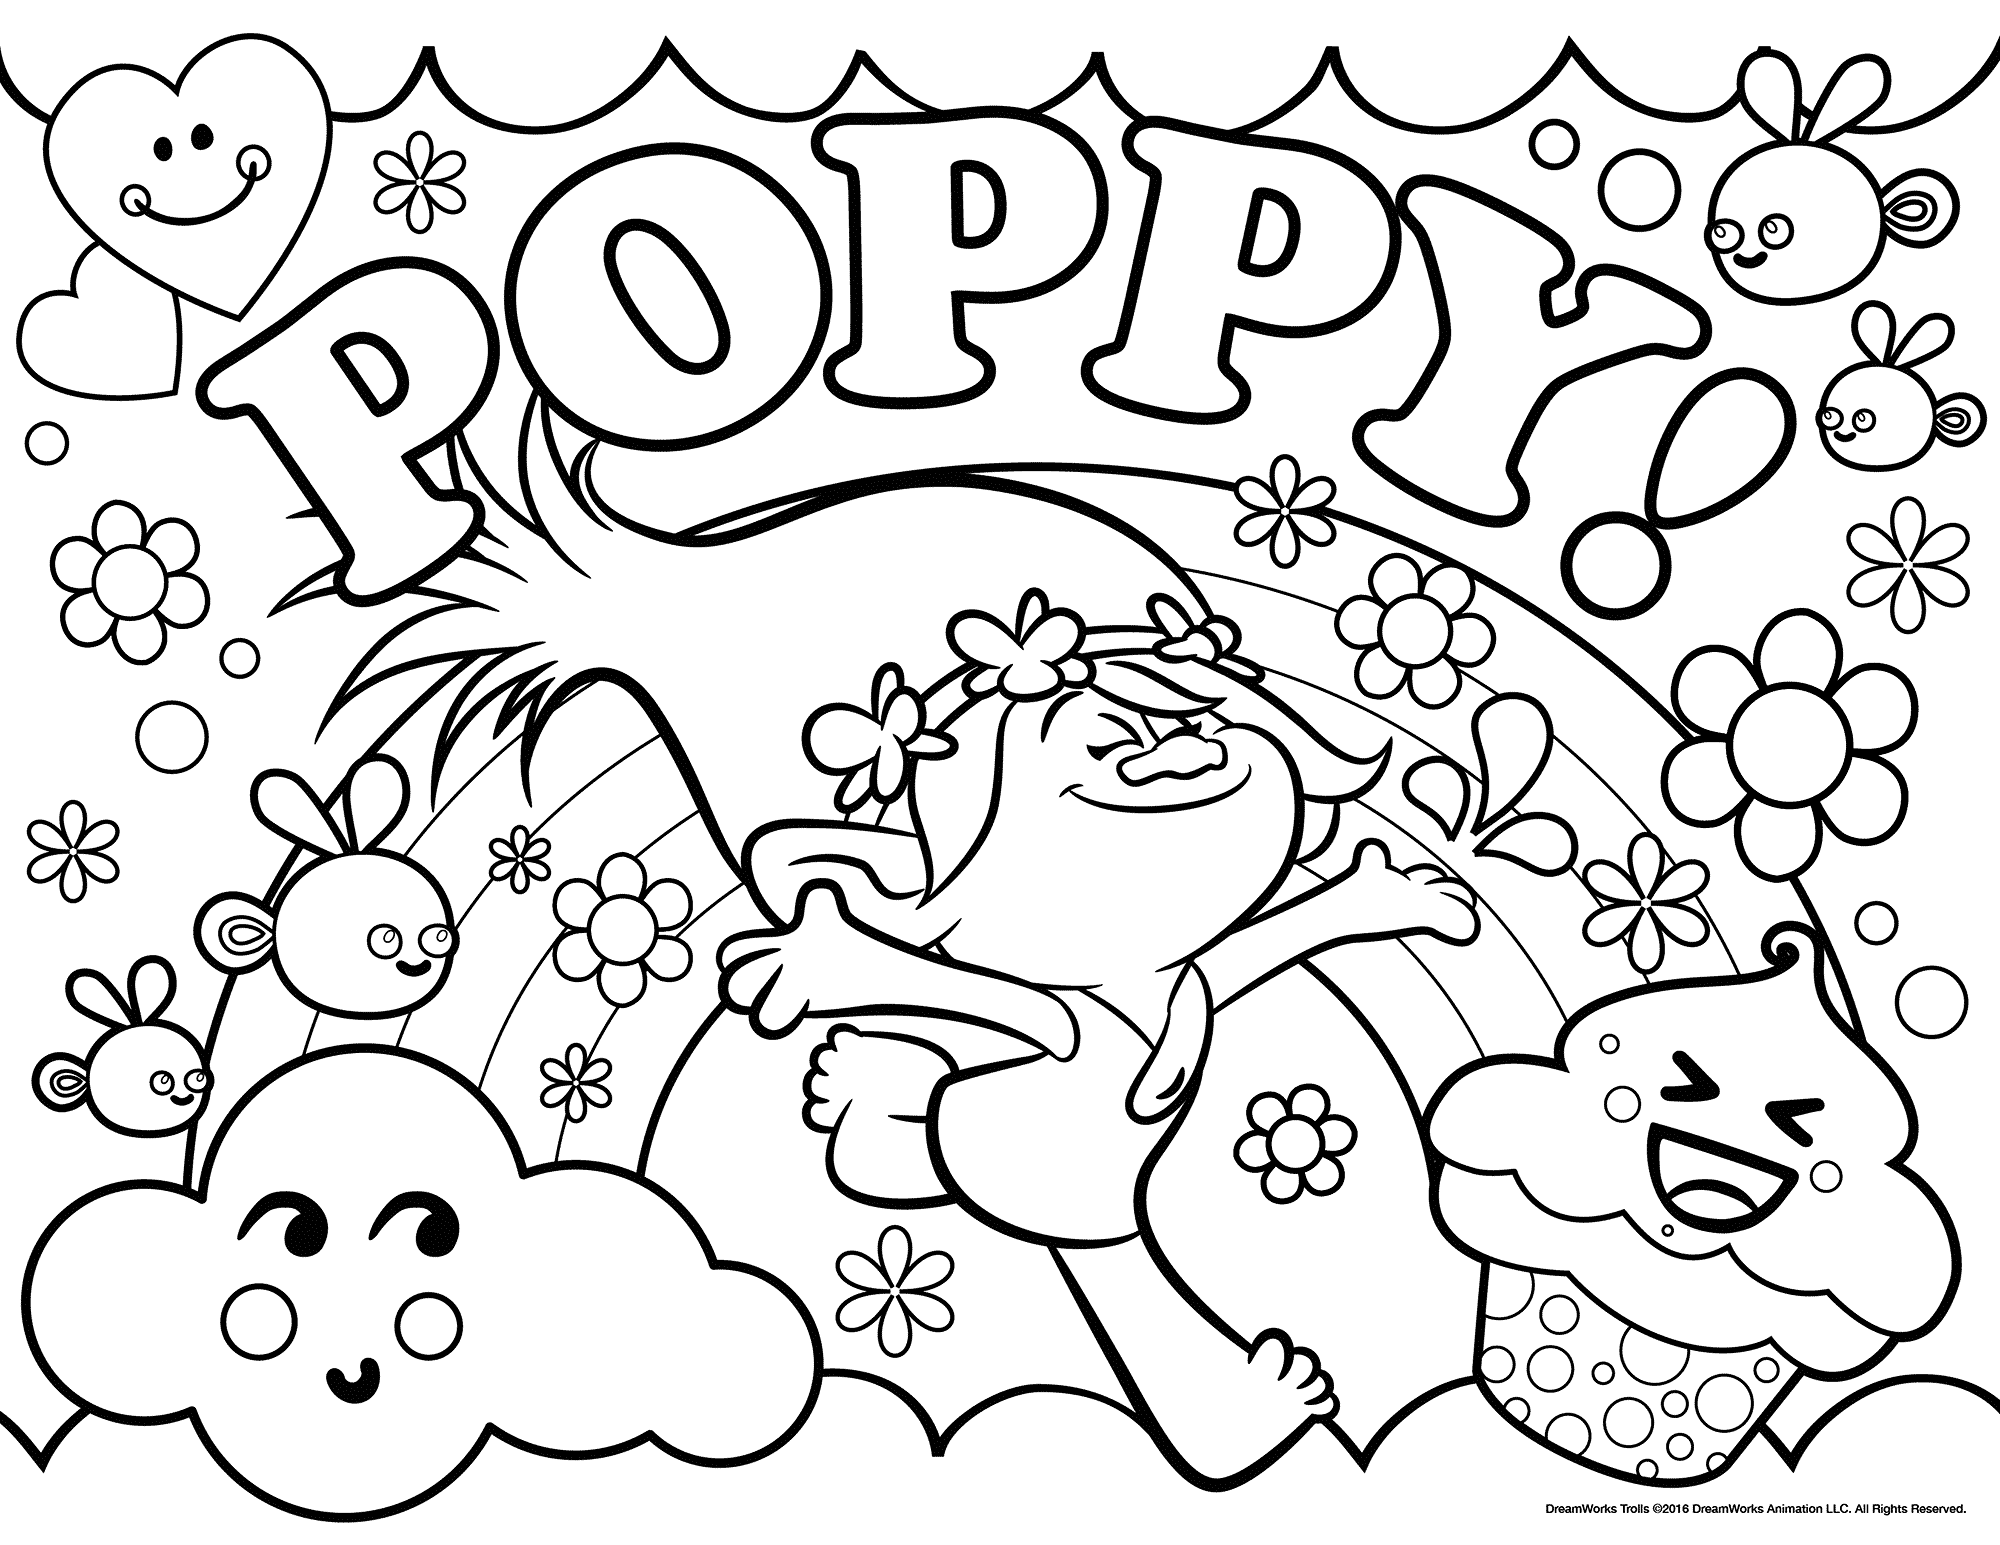 Poppy Trolls Coloring Pages   Coloring Home